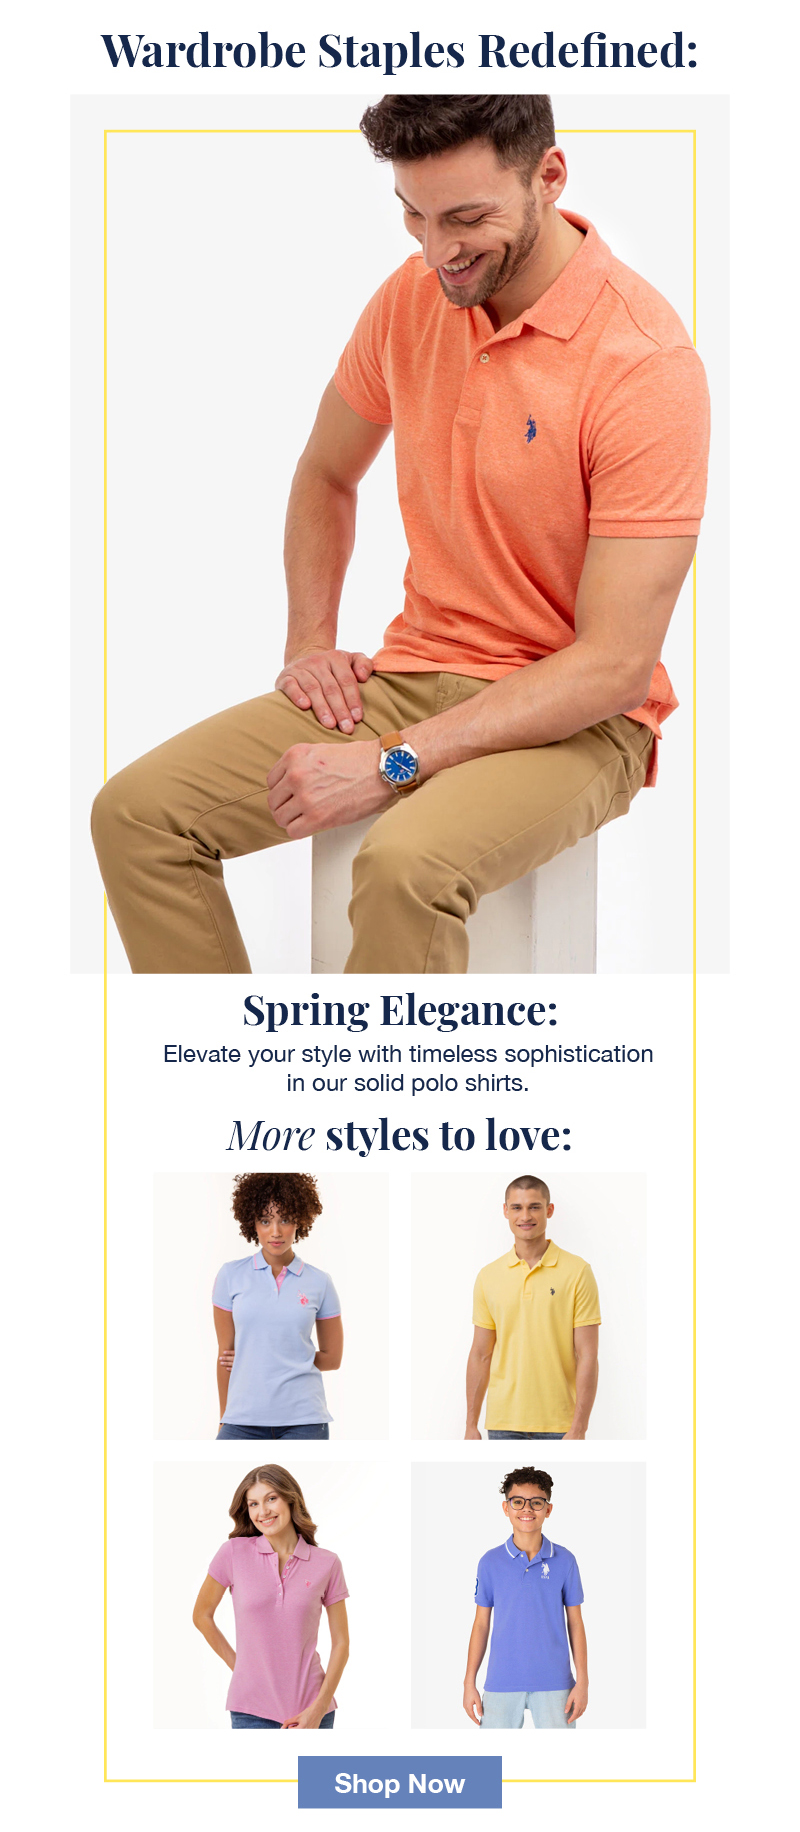 Wardrobe Staples Redefined: Spring Elegance, Elevate your style with timeless sophistication in our solid polo shirts. More styles to love: Shop now